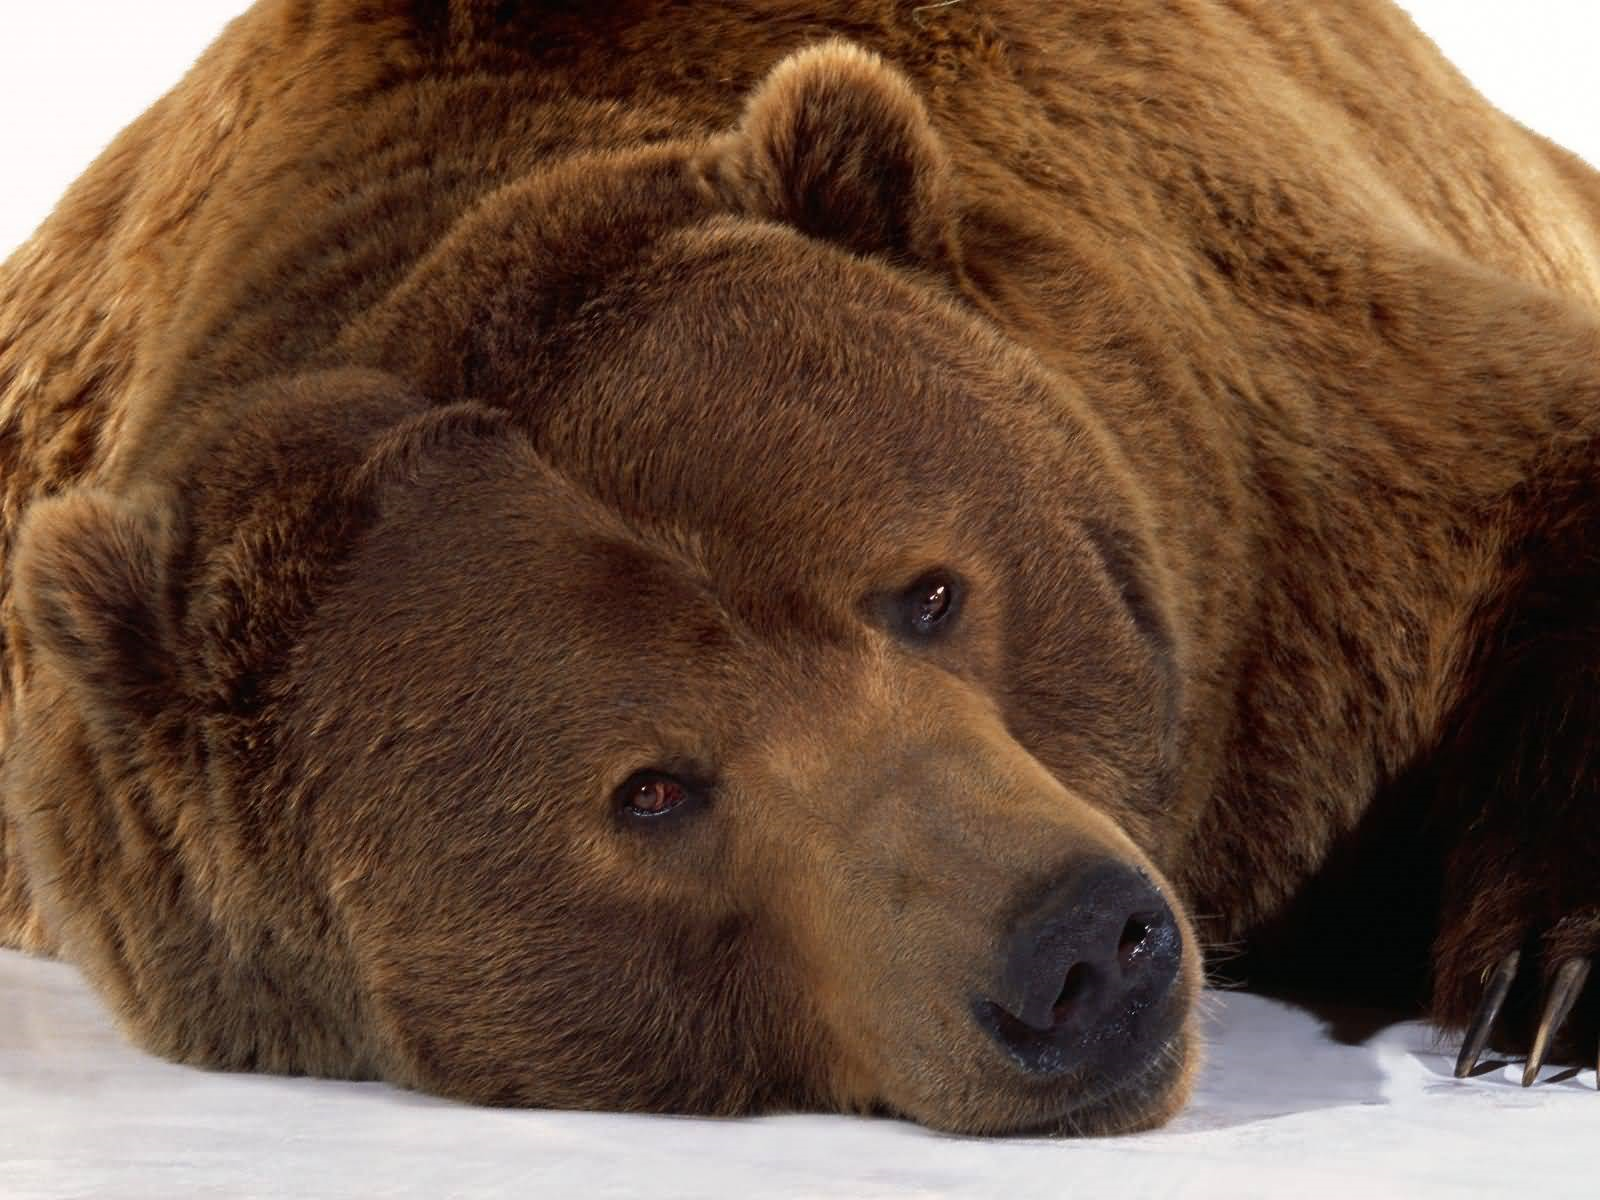 Grizzly Bear Just Looks Like A Big Teddy Bear - Bear, Transparent background PNG HD thumbnail